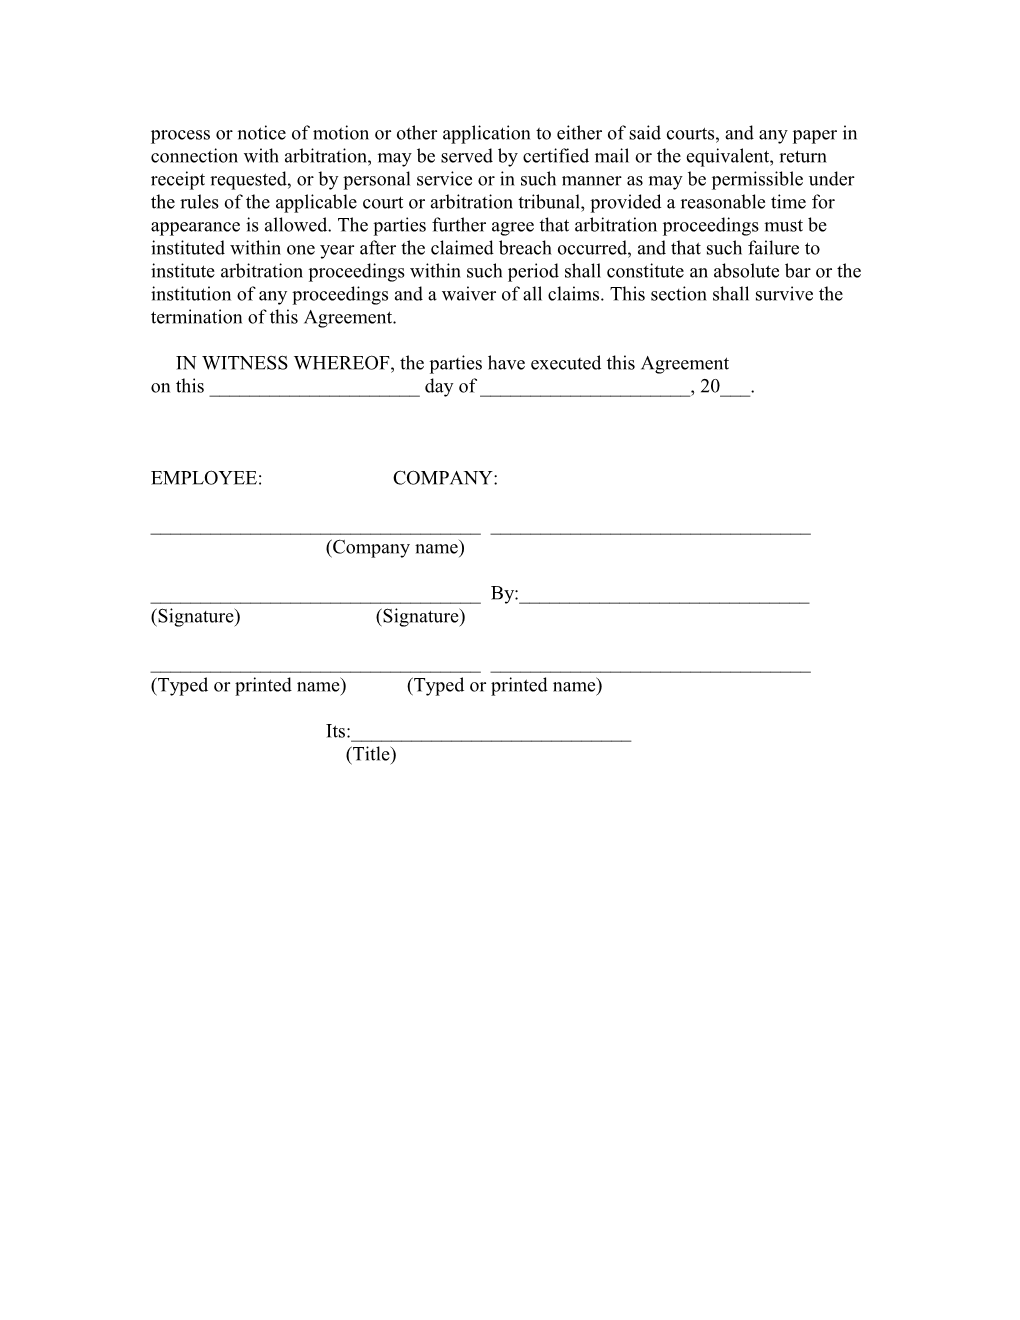 Employee Non-Competition Agreement